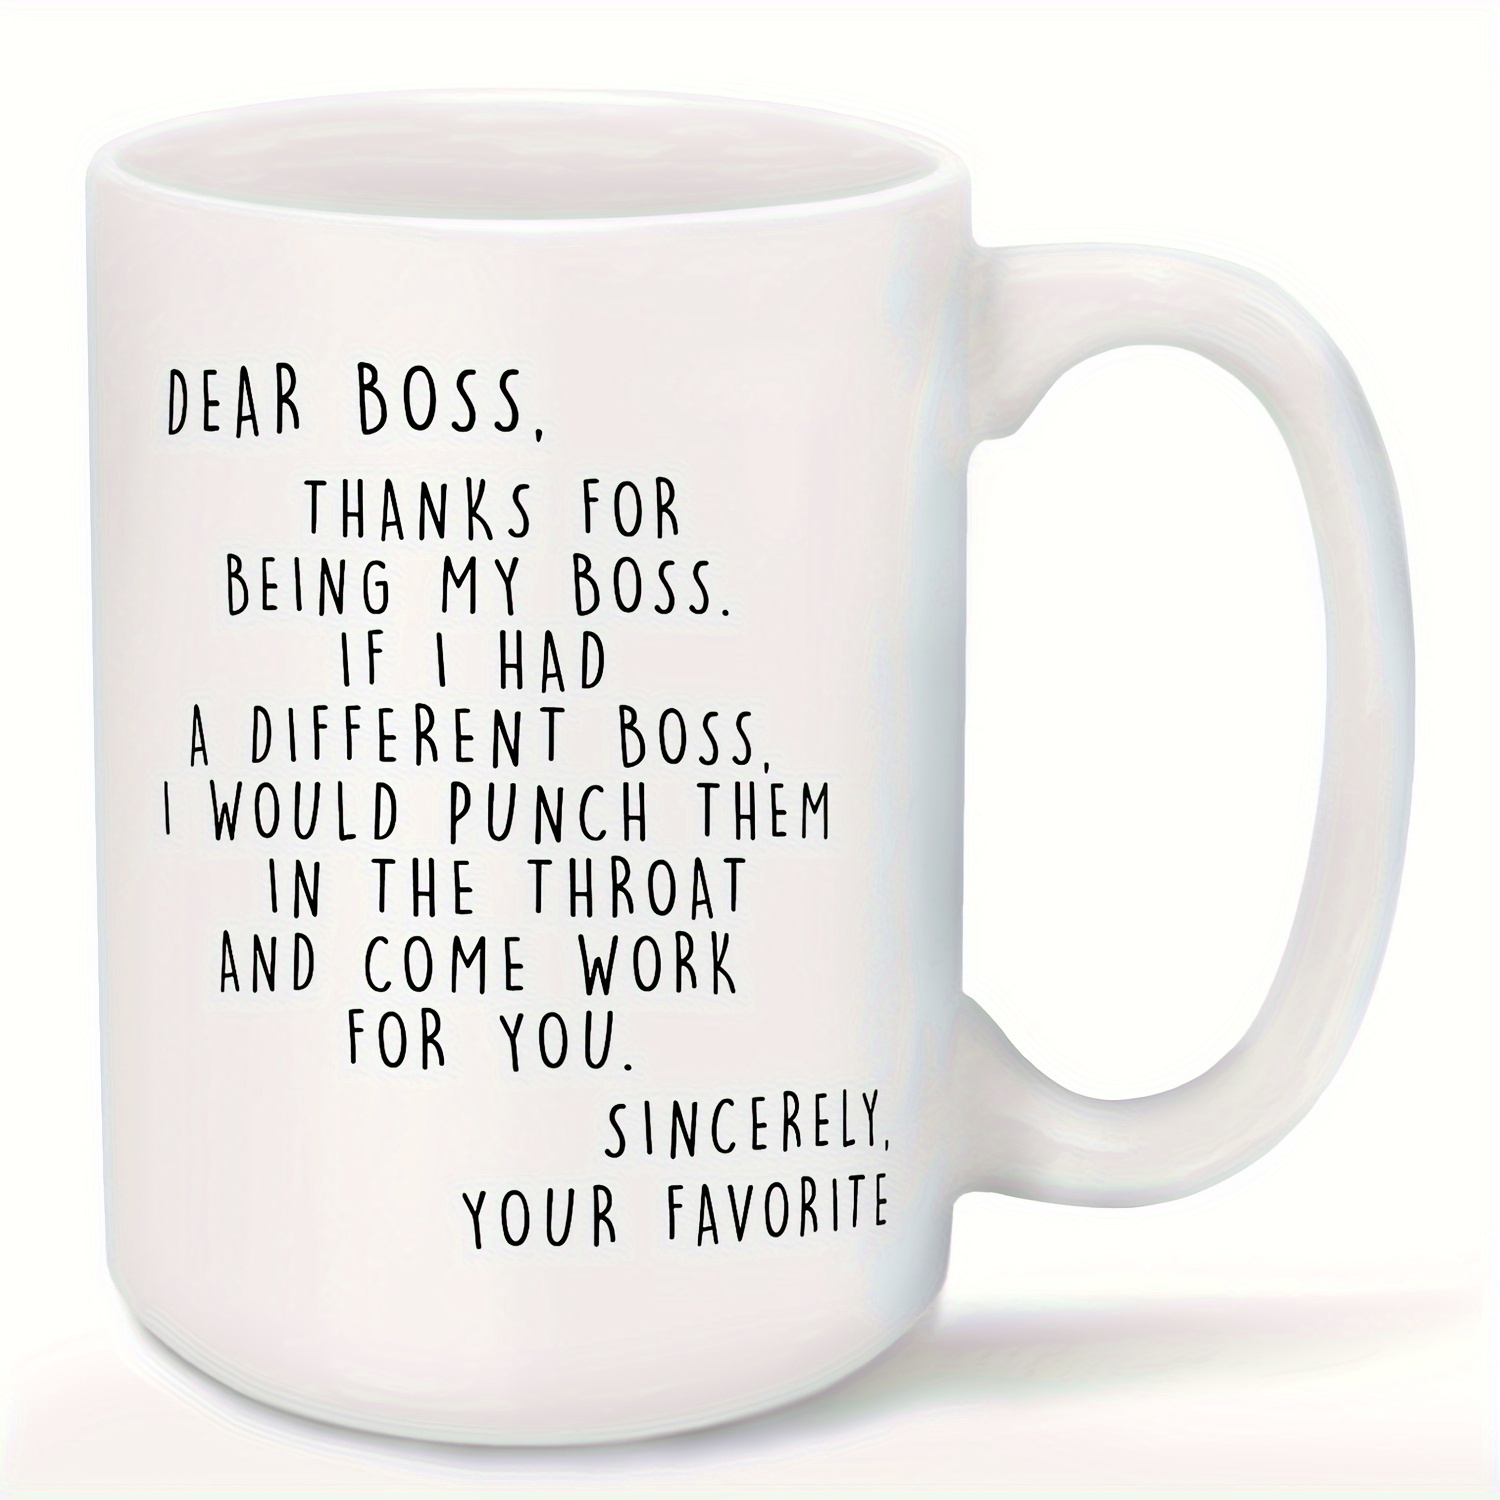 

1pc, Large Coffee Cup, Water Cups, Dear Boss Mug, 15 Ounces Best Boss Mug, Boss Lady Mug, Boss Coffee Mug, Boss Mugs For Men Women, Best Boss Gifts For Men, Funny Boss Gifts